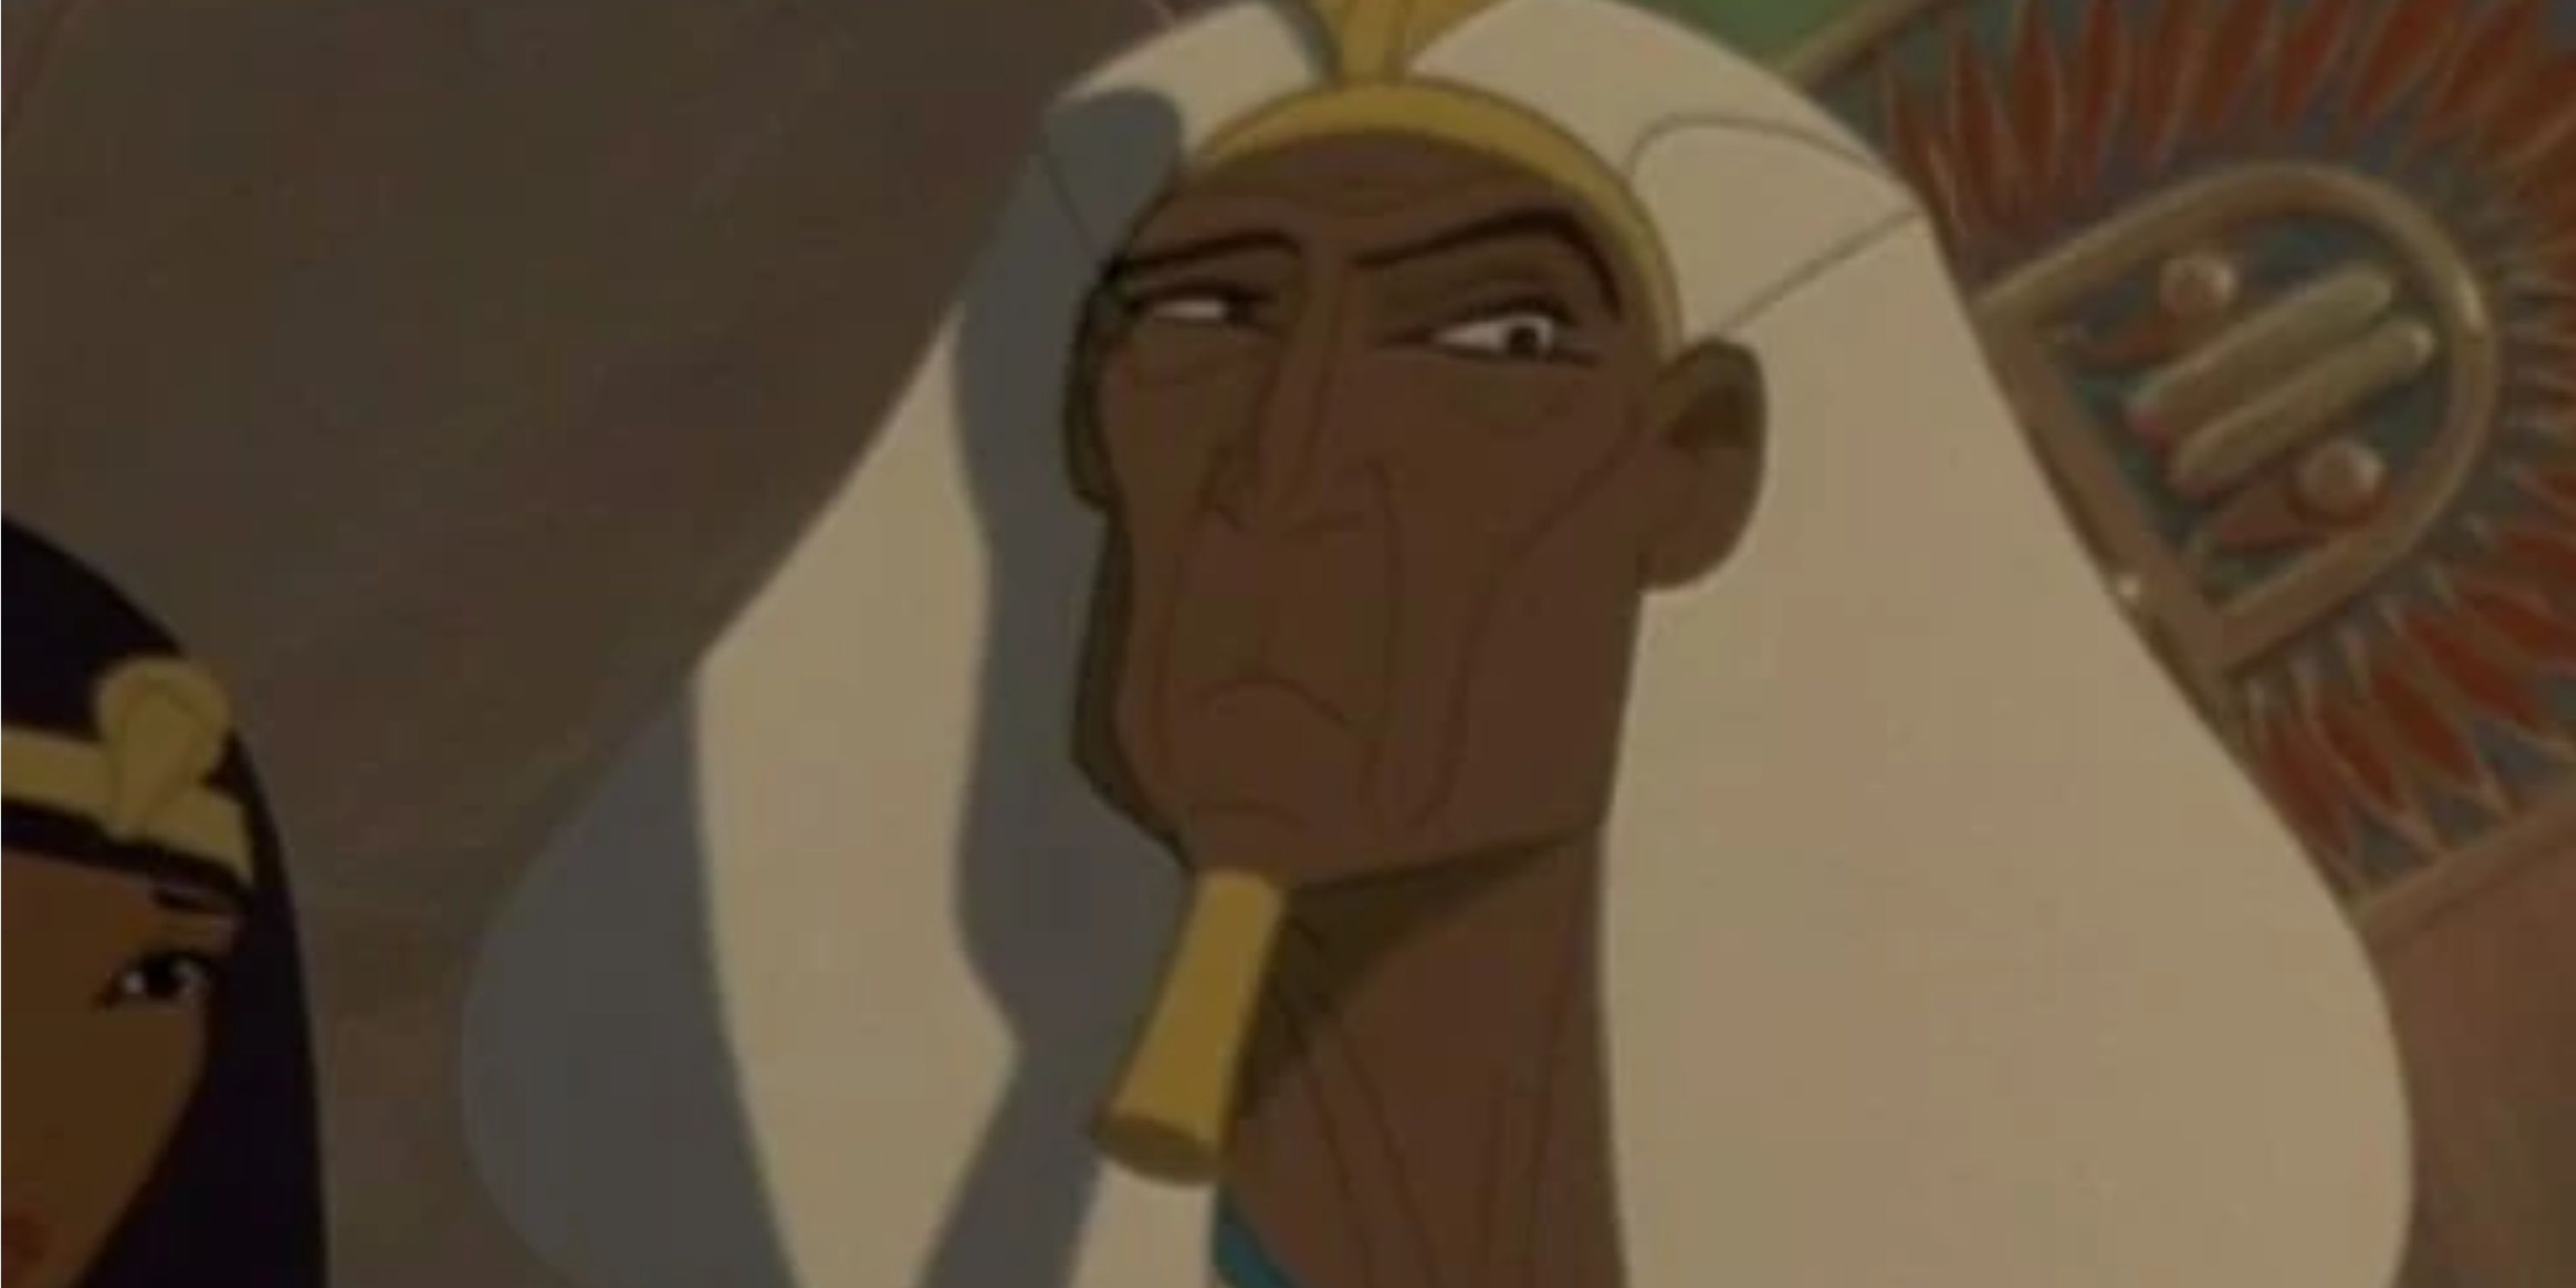 seti from The Prince of Egypt